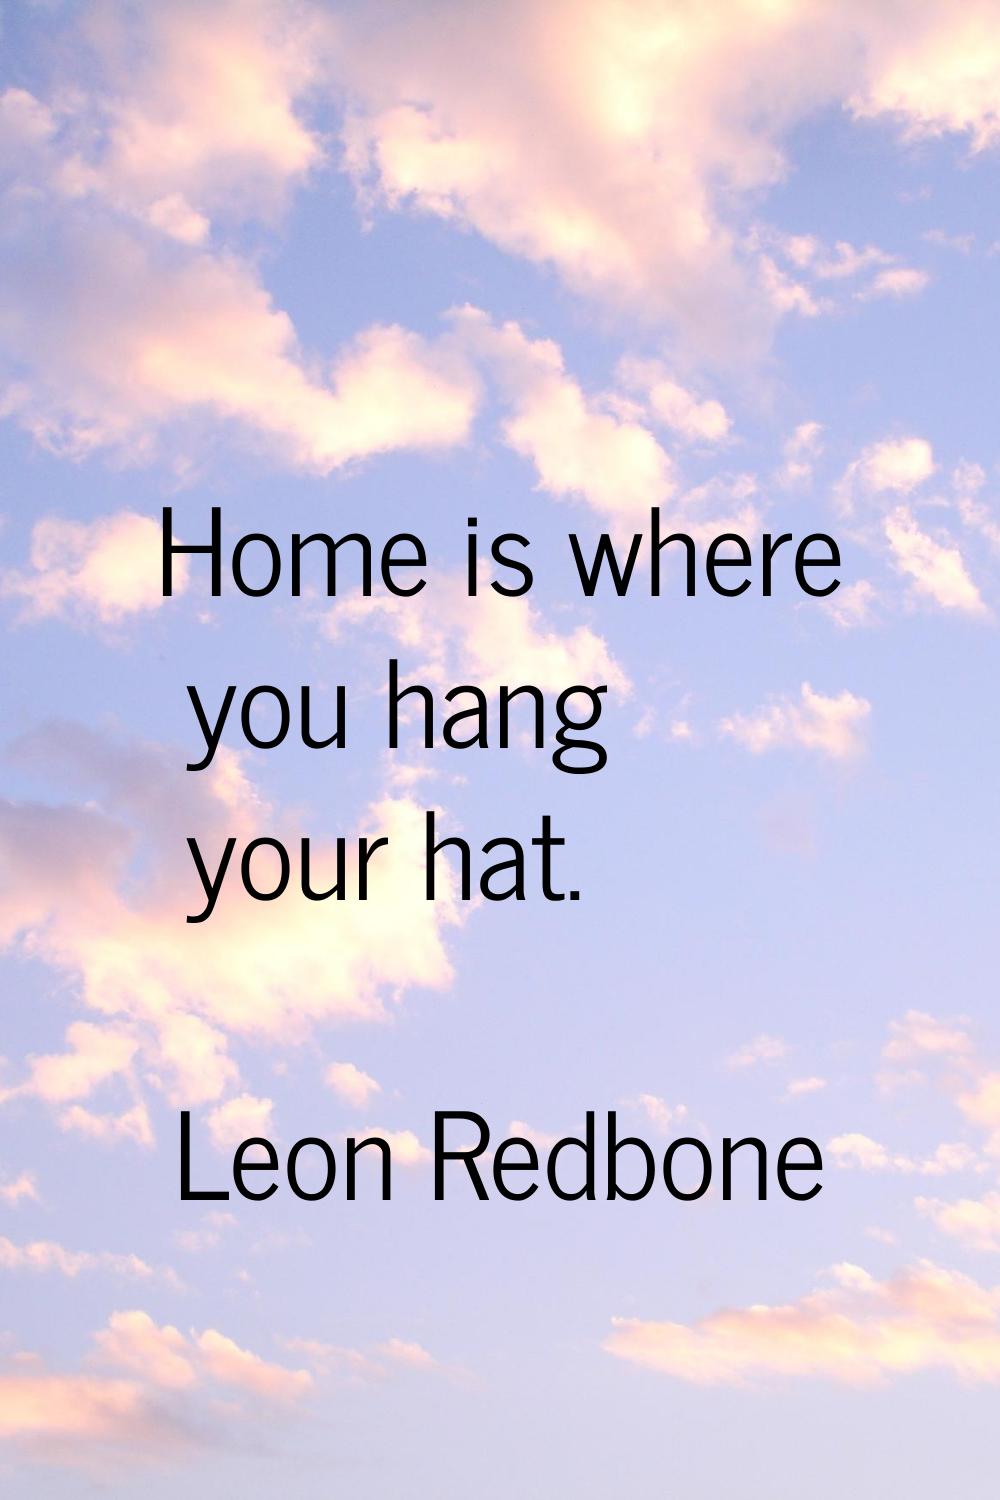 Home is where you hang your hat.